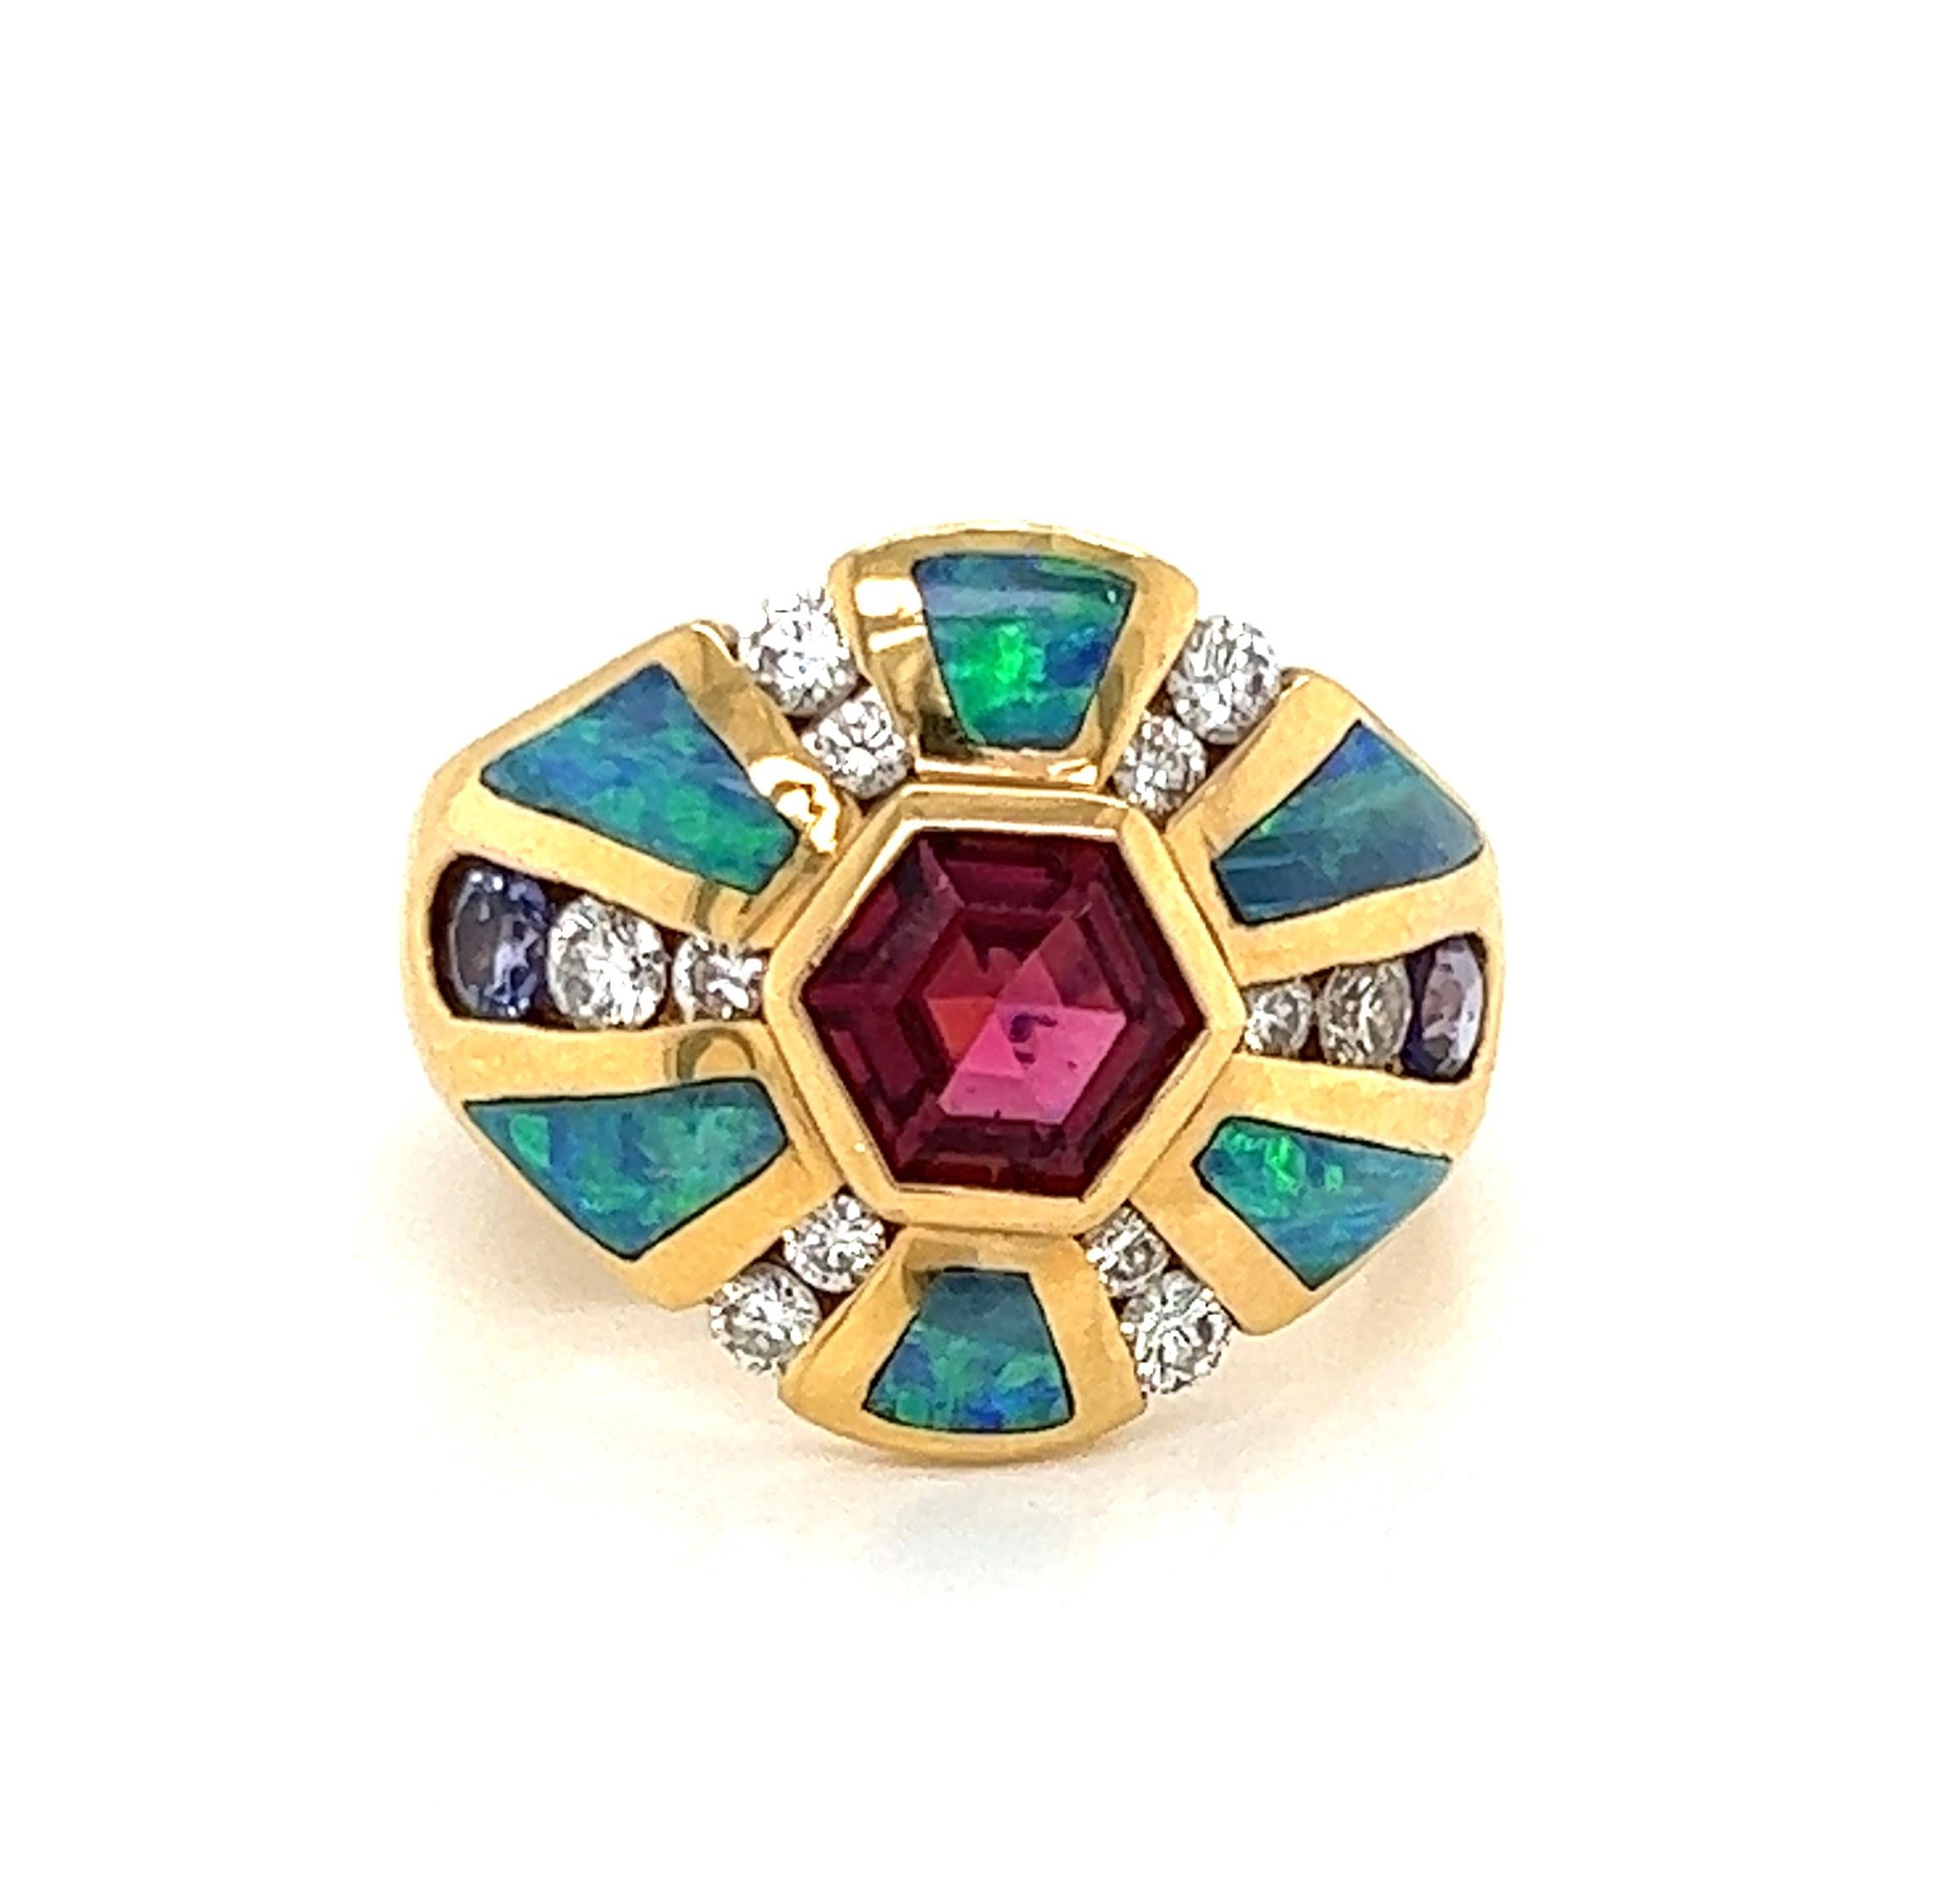 This elegant authentic ring is by Kabana, crafted from 14k yellow gold featuring beautiful design at the front of the ring with an octagonal shape bezel set pink tourmaline in the center and strips of yellow gold set between fire opal inlay with